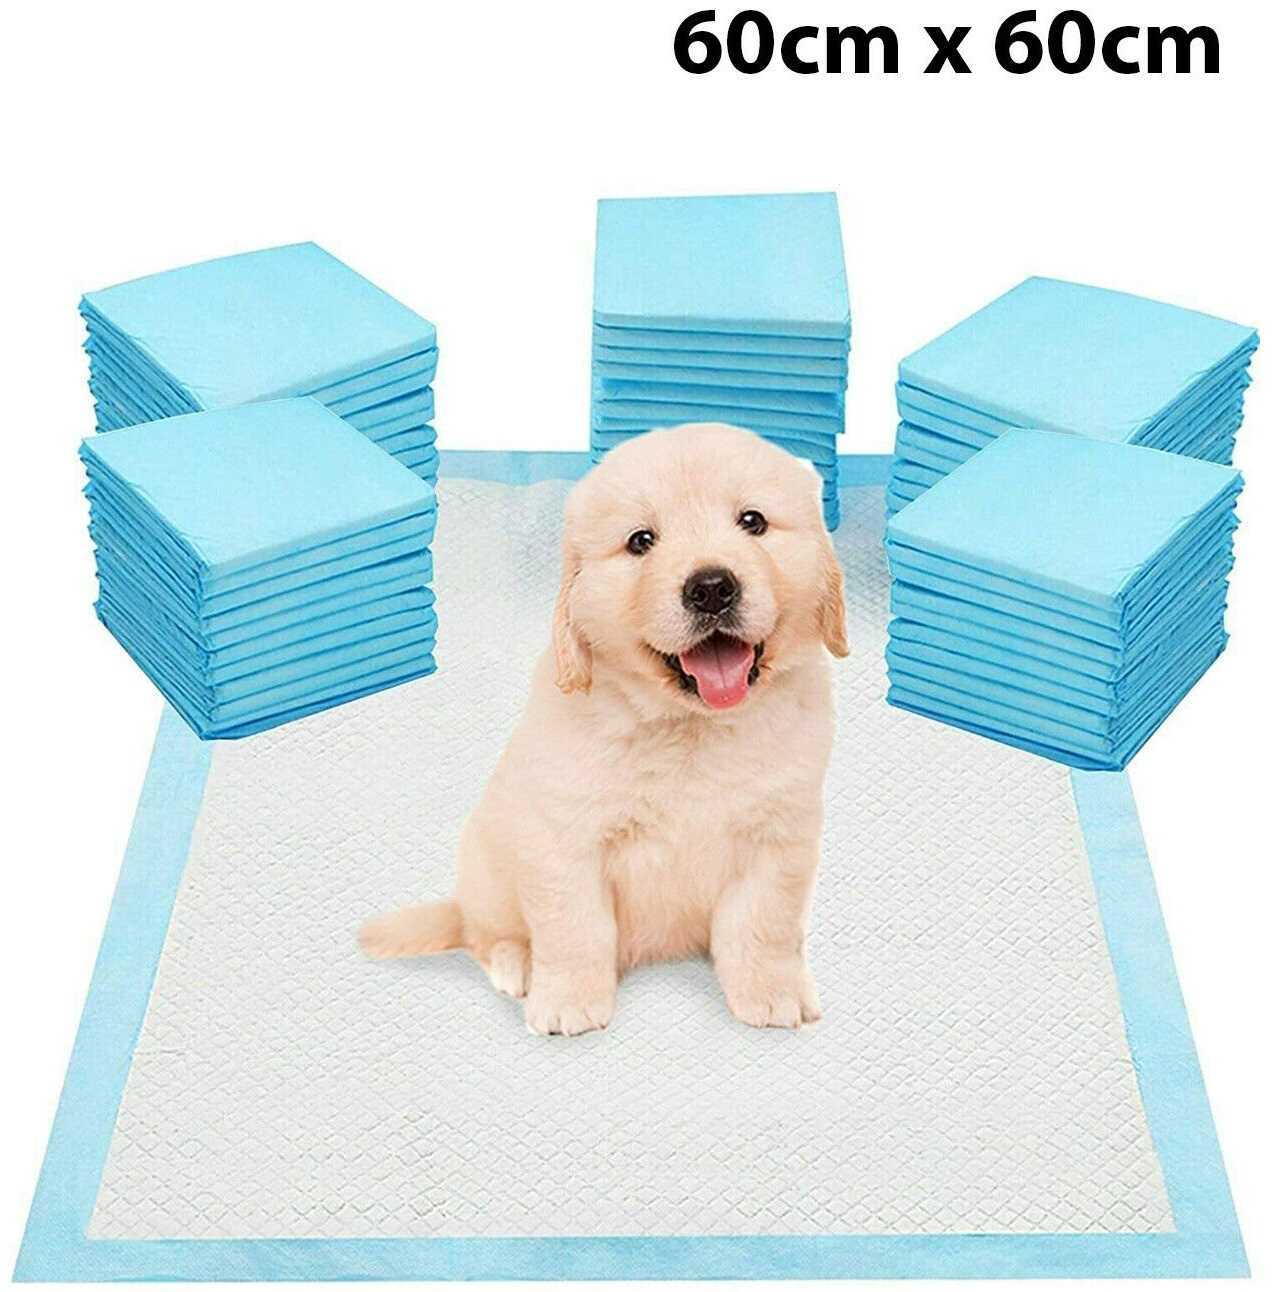 Pack Of 40 Heavy Duty Blue Dog Puppy Large Training Wee Wee Pads Pad Floor Toilet Mats 60 X 60cm